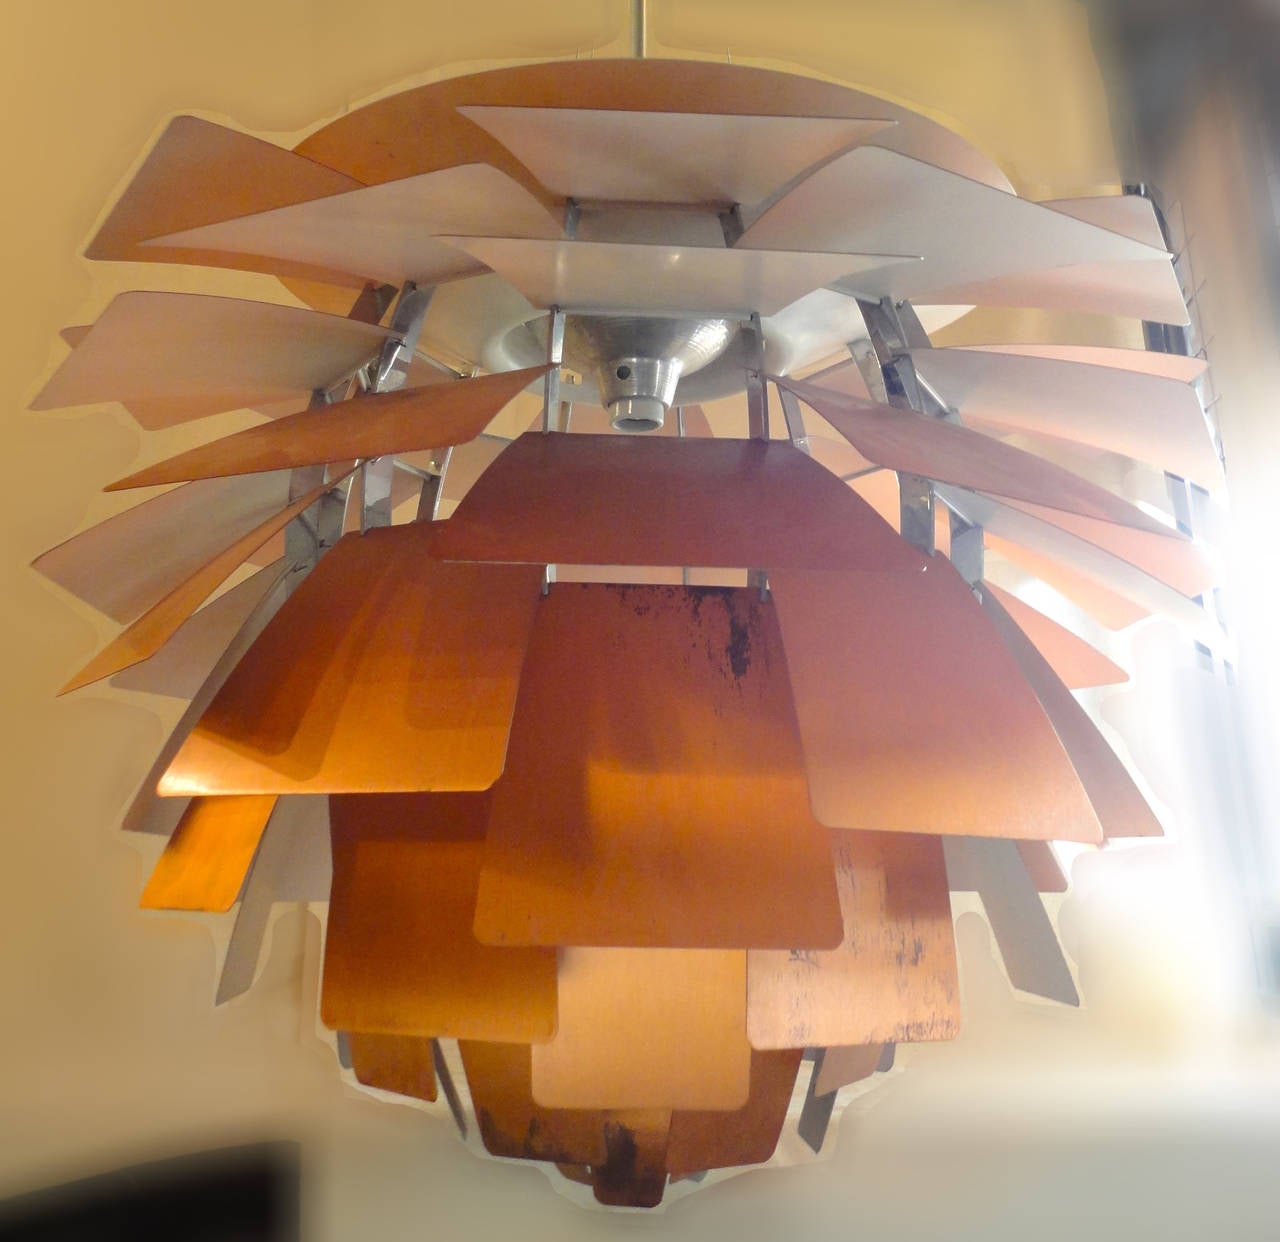 Mid-Century Modern PH chandelier made for Louis Poulsen with rich copper color leaves. A Classic in Mid-Century design by the premier designer in lighting. Made to give an even, diffused light with no major glare.
Height to top of canopy: approx.